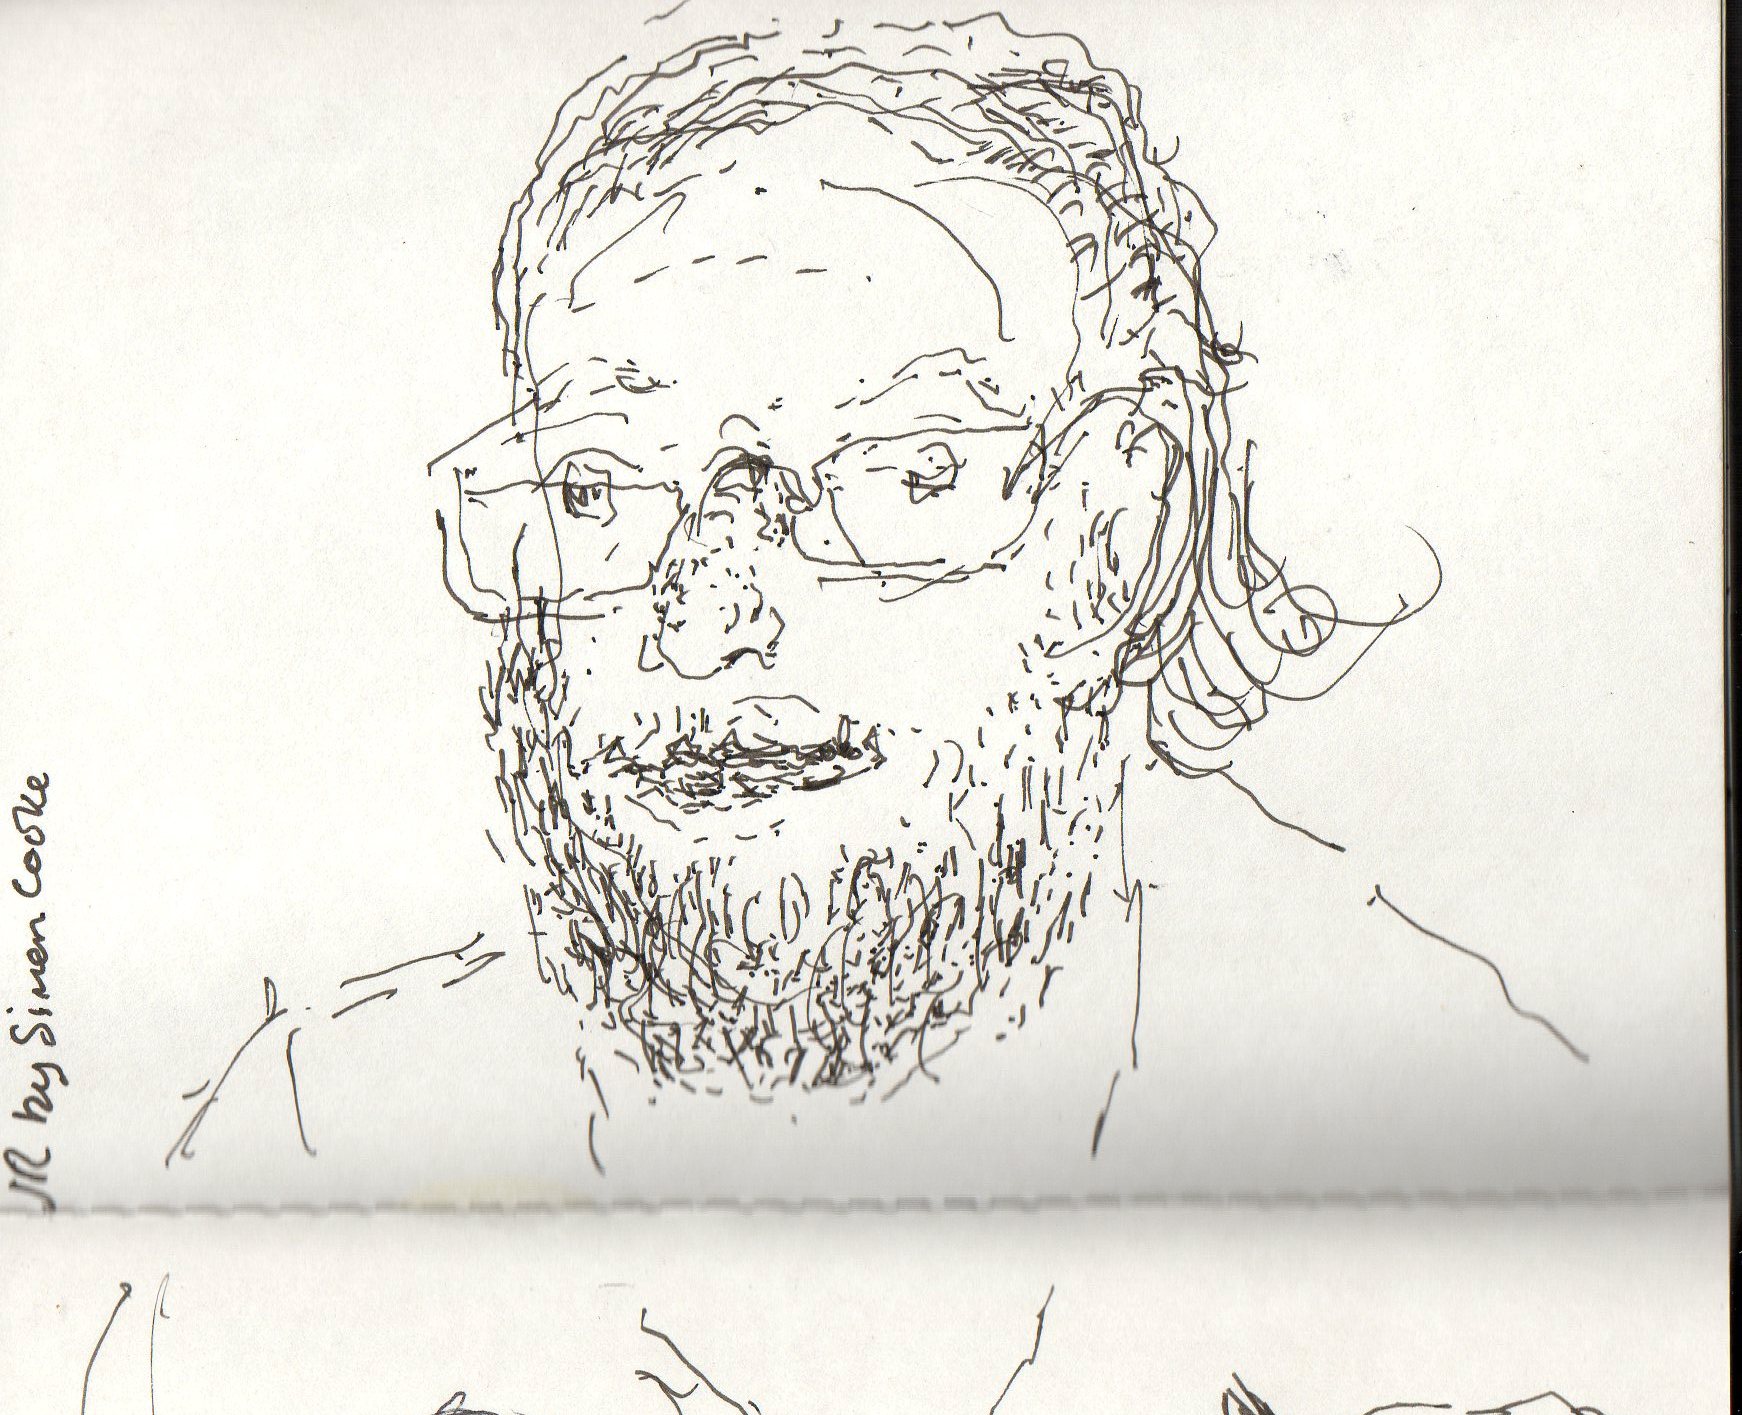 the drawing shows a man with glasses and hair